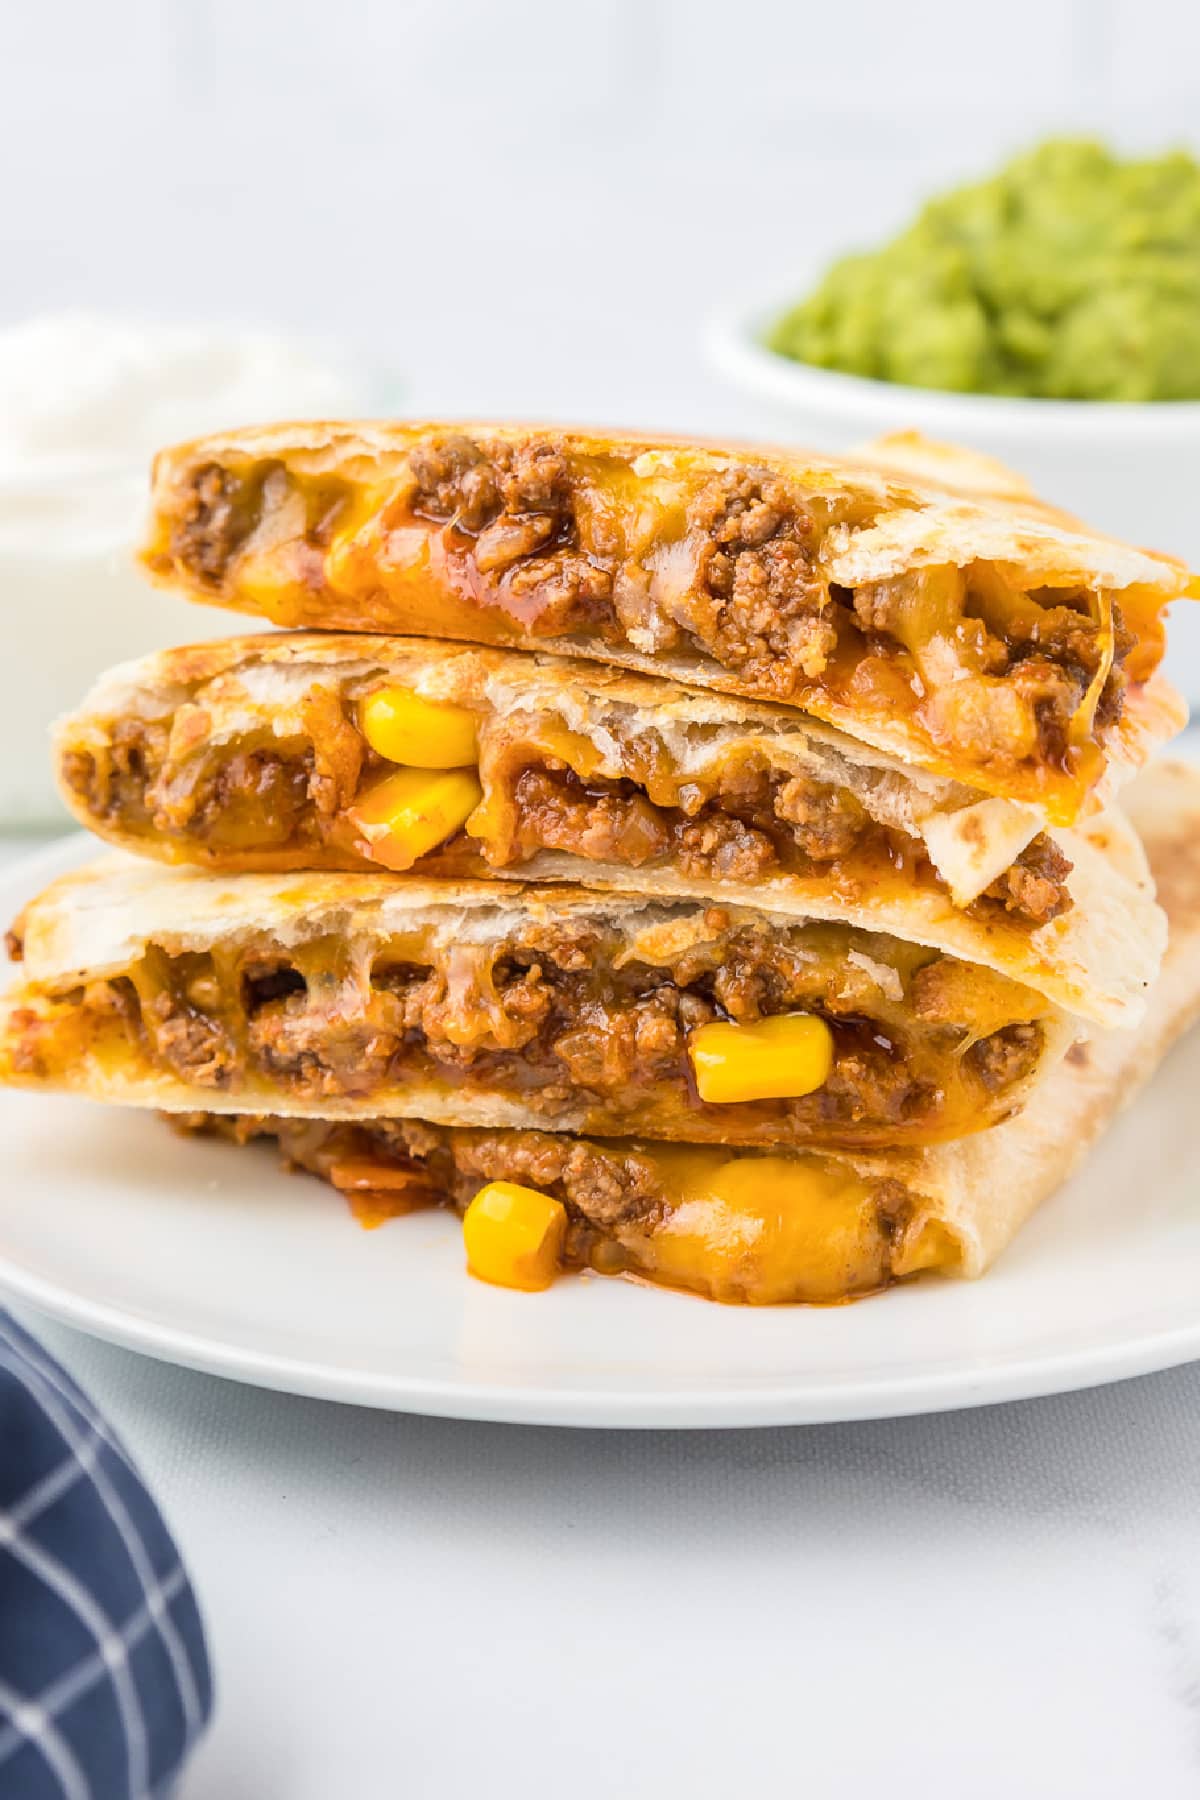 Side view of a beefy cheesy quesadilla stacked four high on a plate with piece of corn in the filling and guacamole in a bowl in the background.